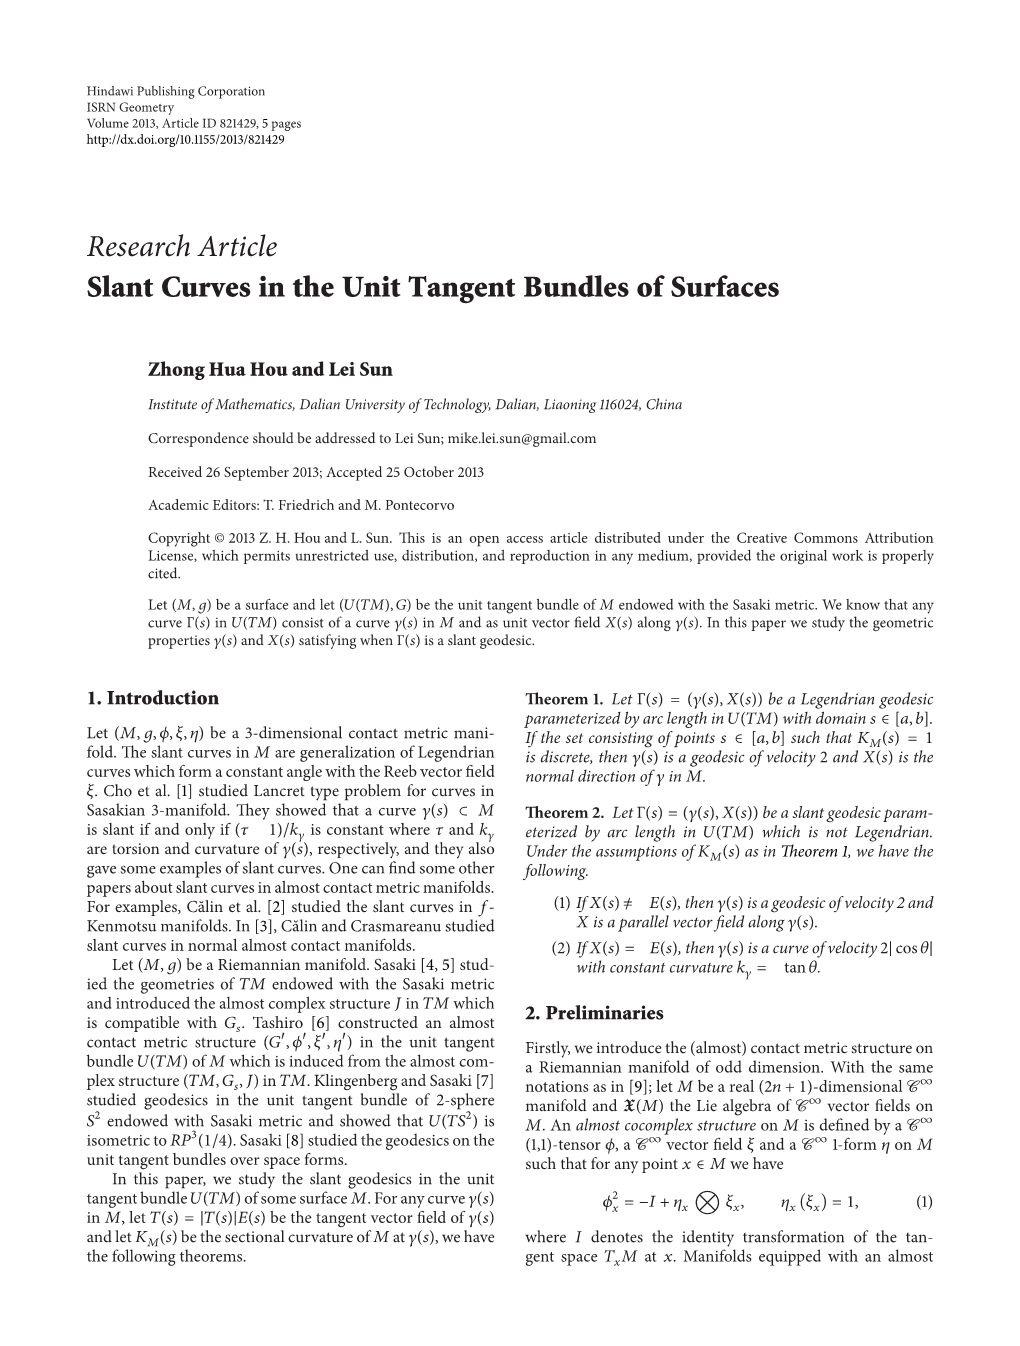 Research Article Slant Curves in the Unit Tangent Bundles of Surfaces